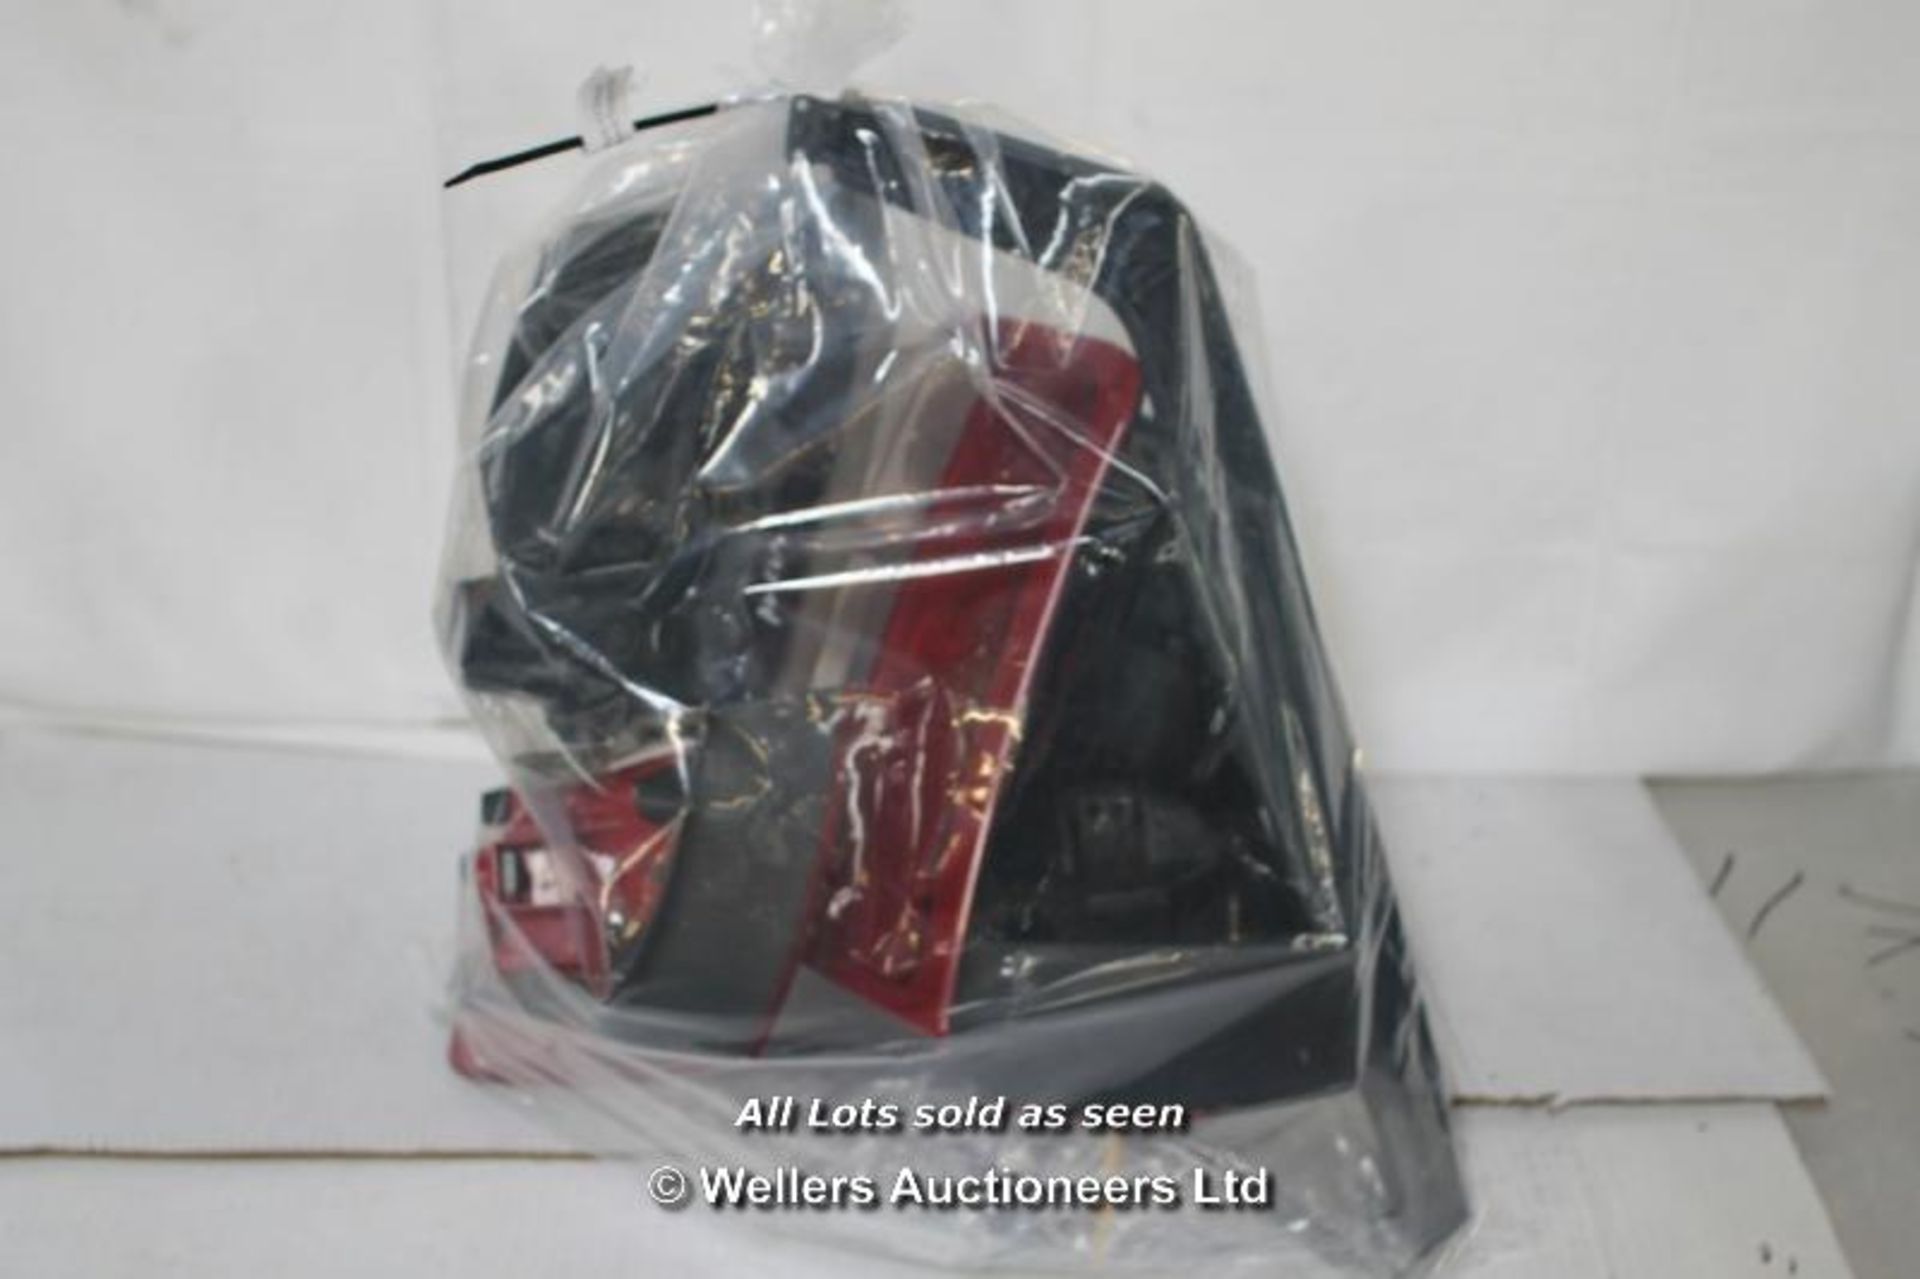 BAG OF 7 MIXED CAR PARTS INC. CARBON FIBER LIGHT TRIMMING, X3 VARIOUS SPARE REAR LIGHTS, X1 SPARE - Image 2 of 2